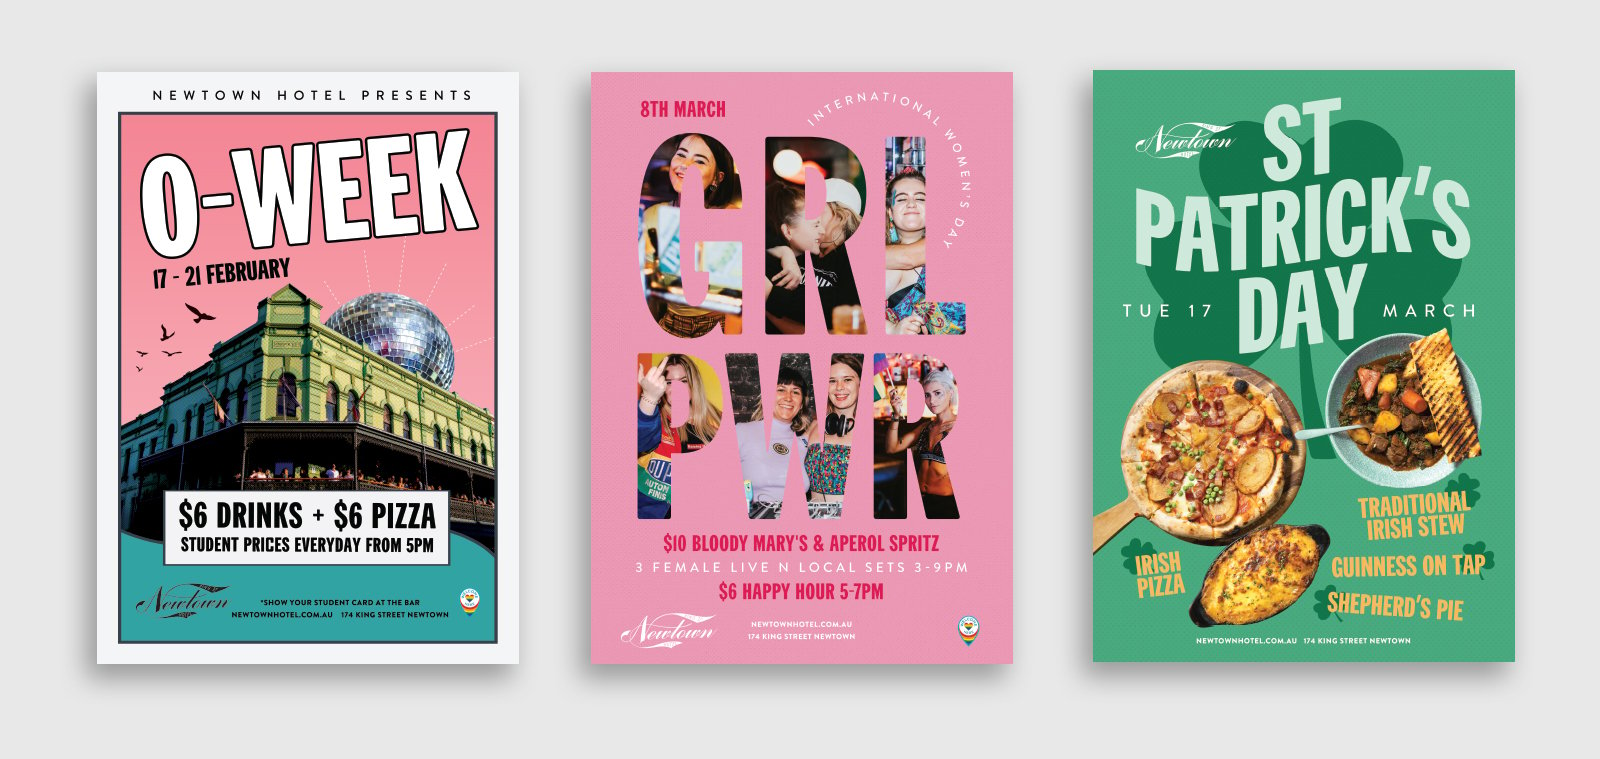 three different poster designs for events at the newtown hotel